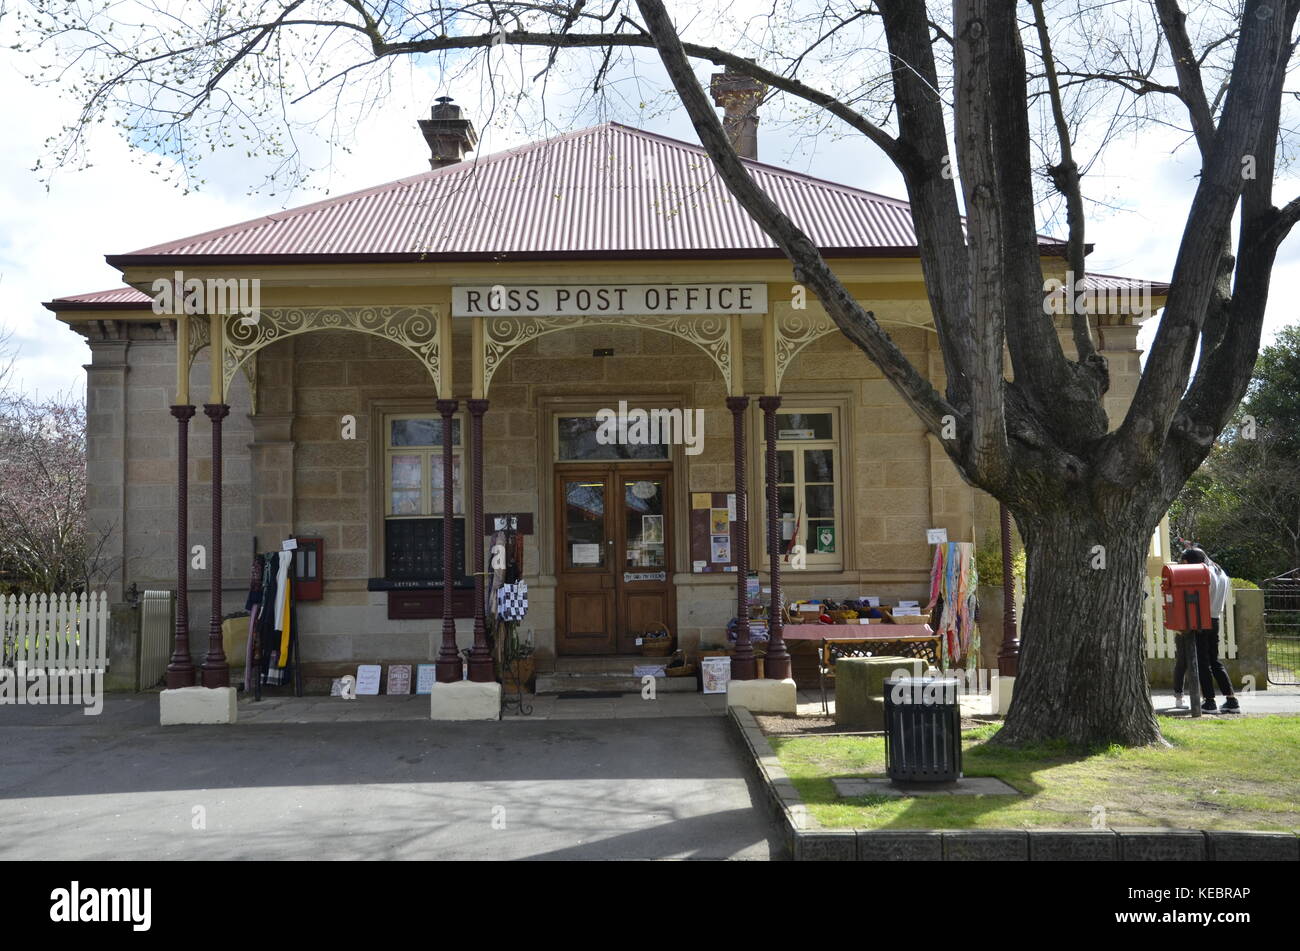 The Post Office in the historic village of Ross in central Tasmania, noted for its convict history Stock Photo